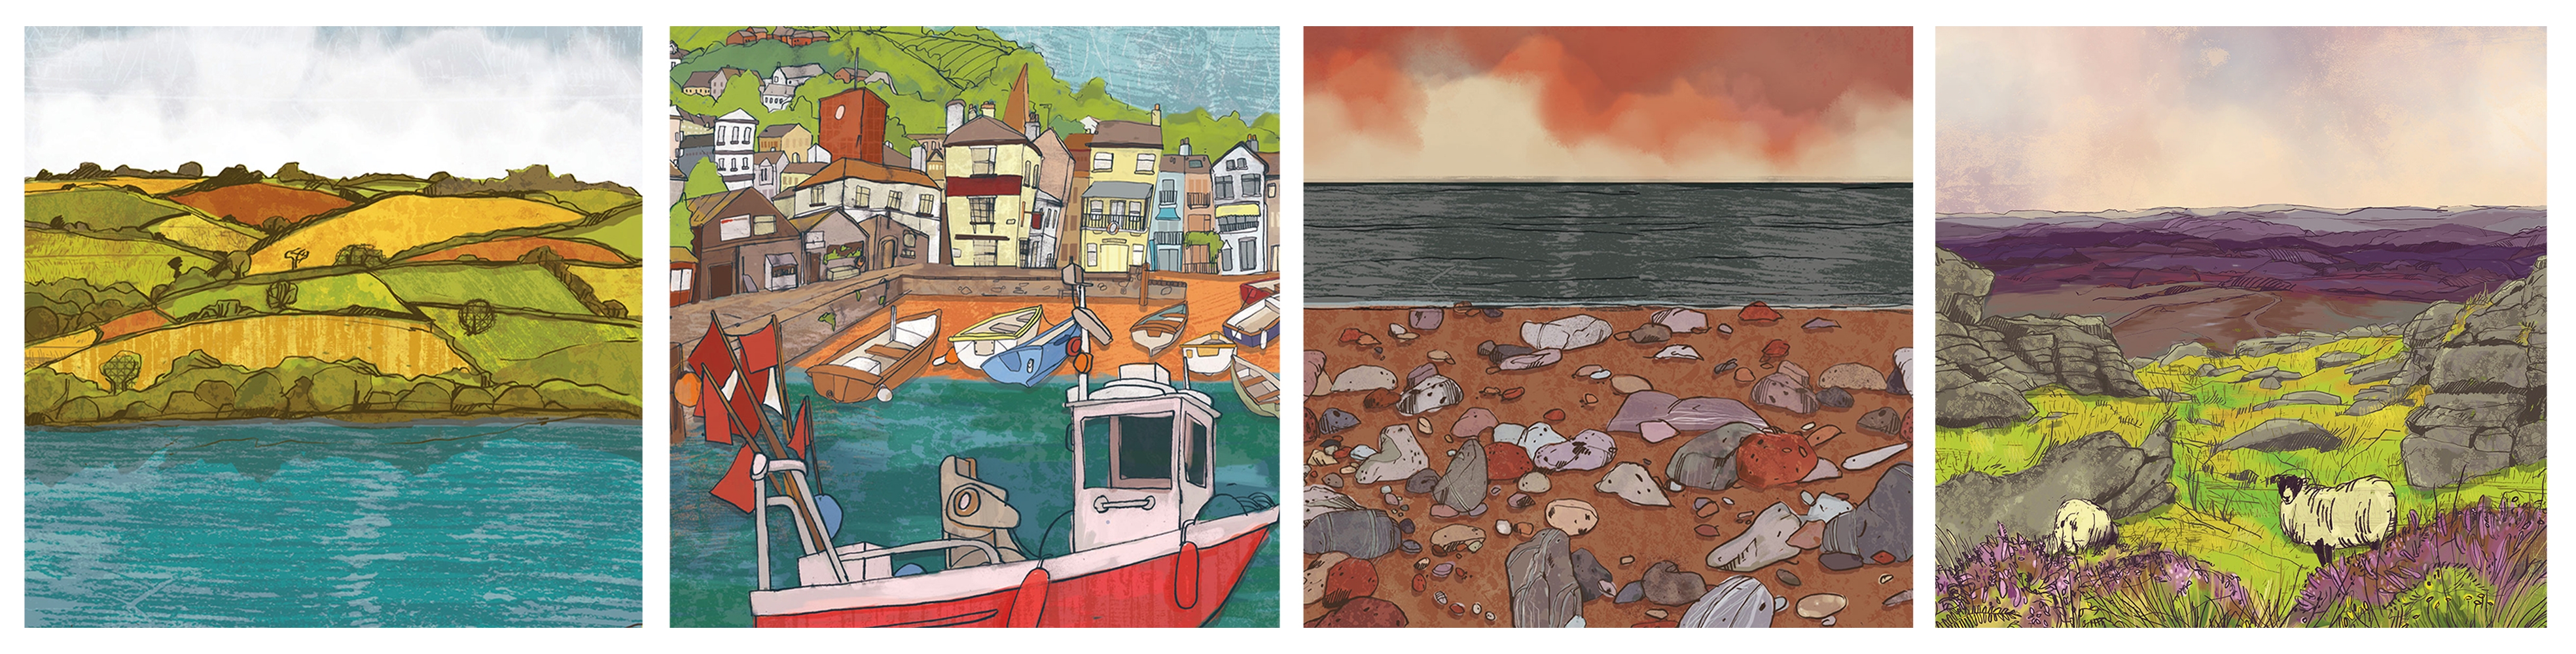 Illustration by Holly Truhol | Various Illustrated Prints of Teignmouth and Devon | Local Artist